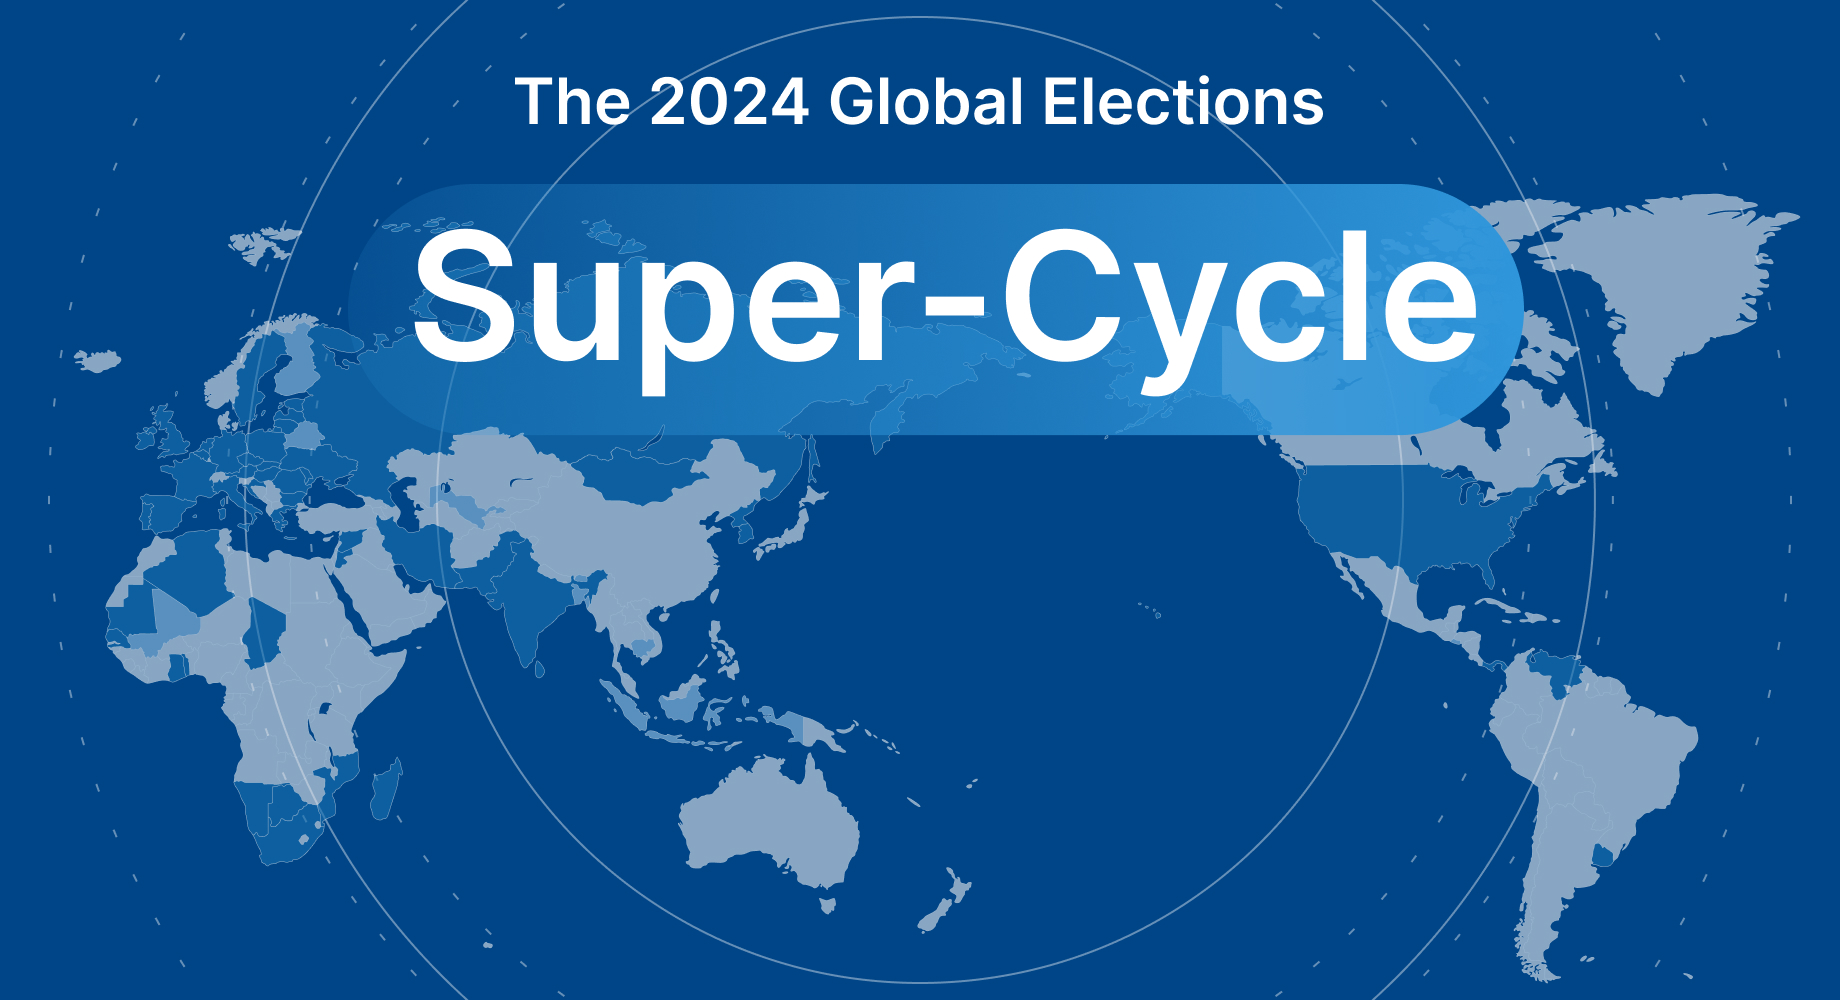 2024 Global Elections Super-Cycle image